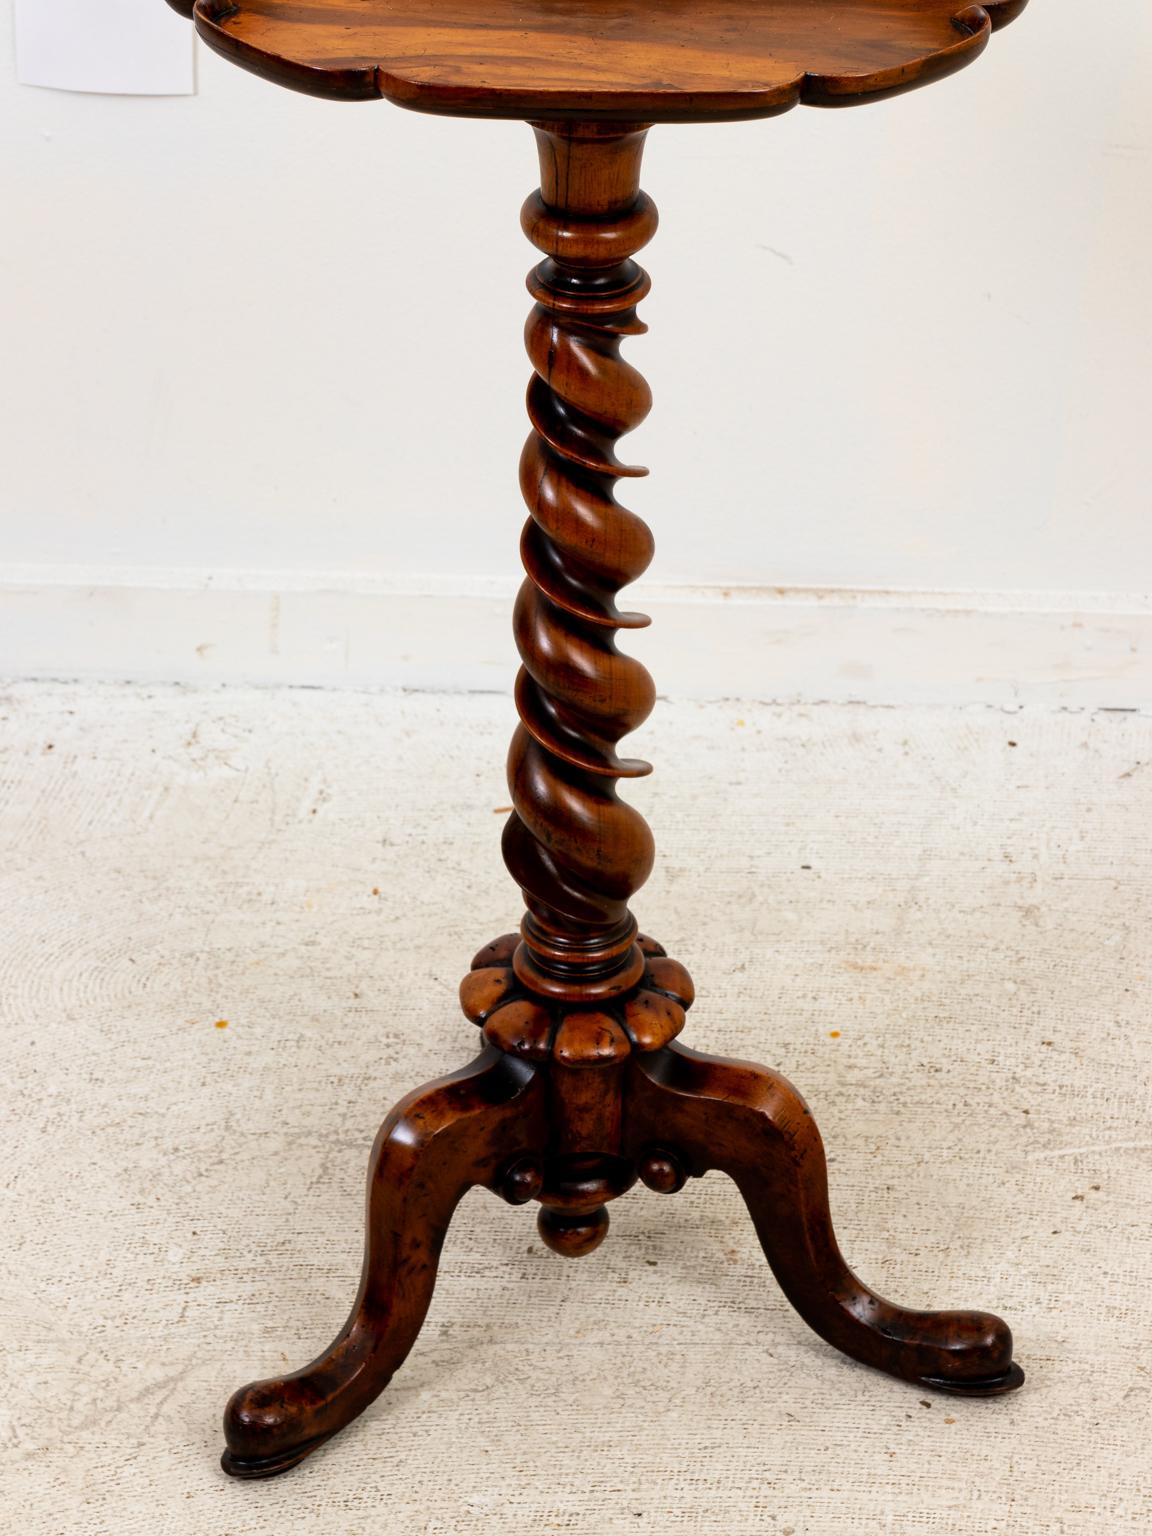 Circa late 18th century walnut work table with snake turned feet. The piece also features tripod legs that support a barley twist central column and a kidney shaped work surface with scalloped trim. On the far side of the kidney shaped tabletop